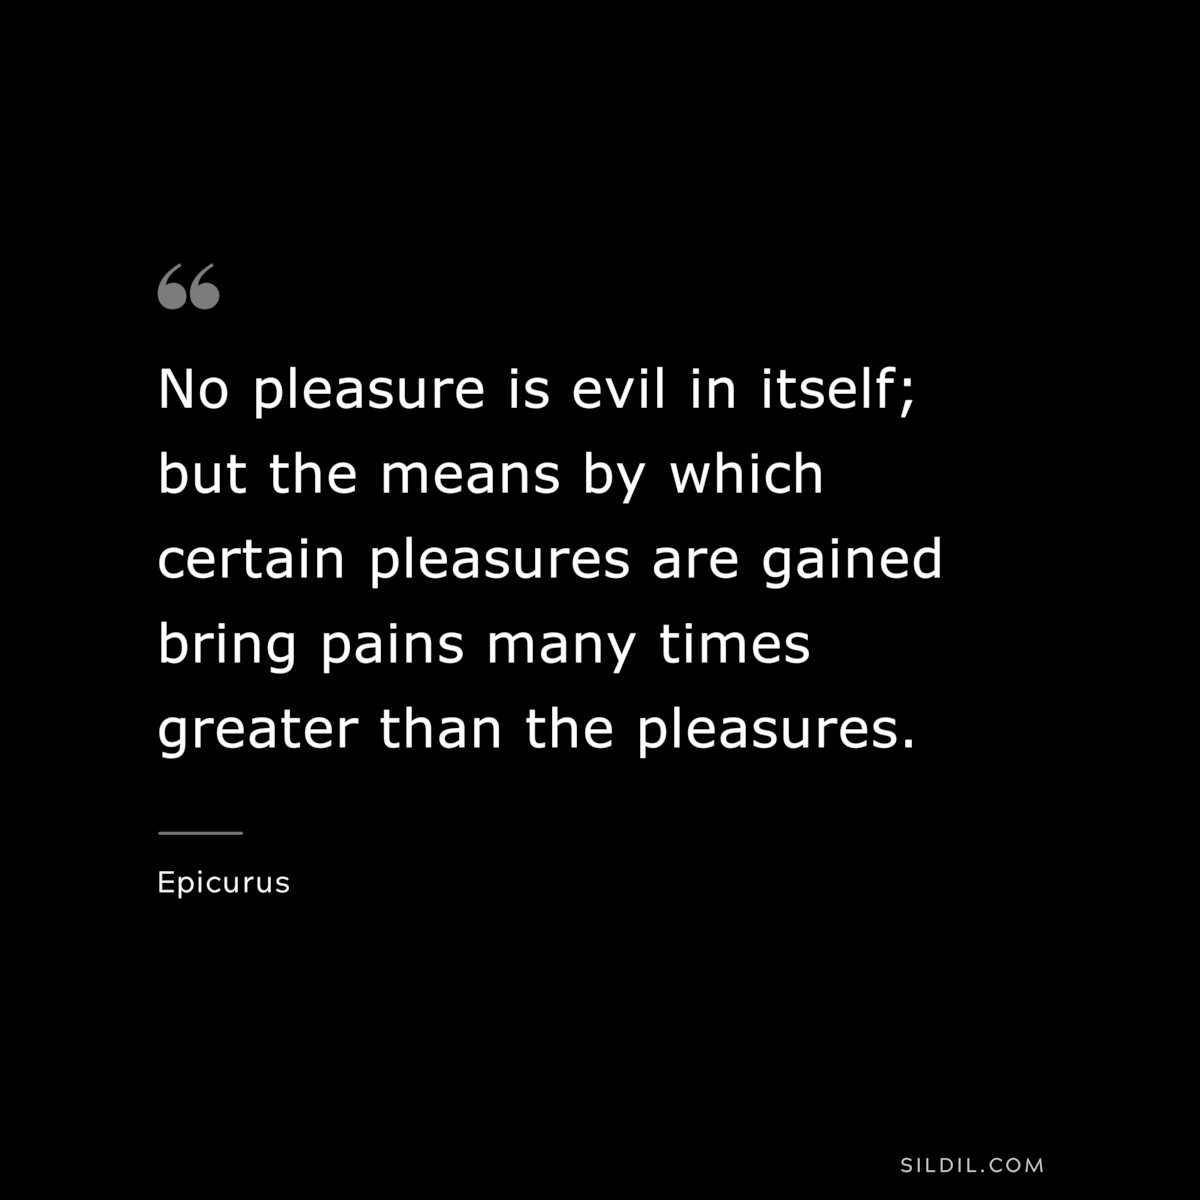 No pleasure is evil in itself; but the means by which certain pleasures are gained bring pains many times greater than the pleasures. — Epicurus